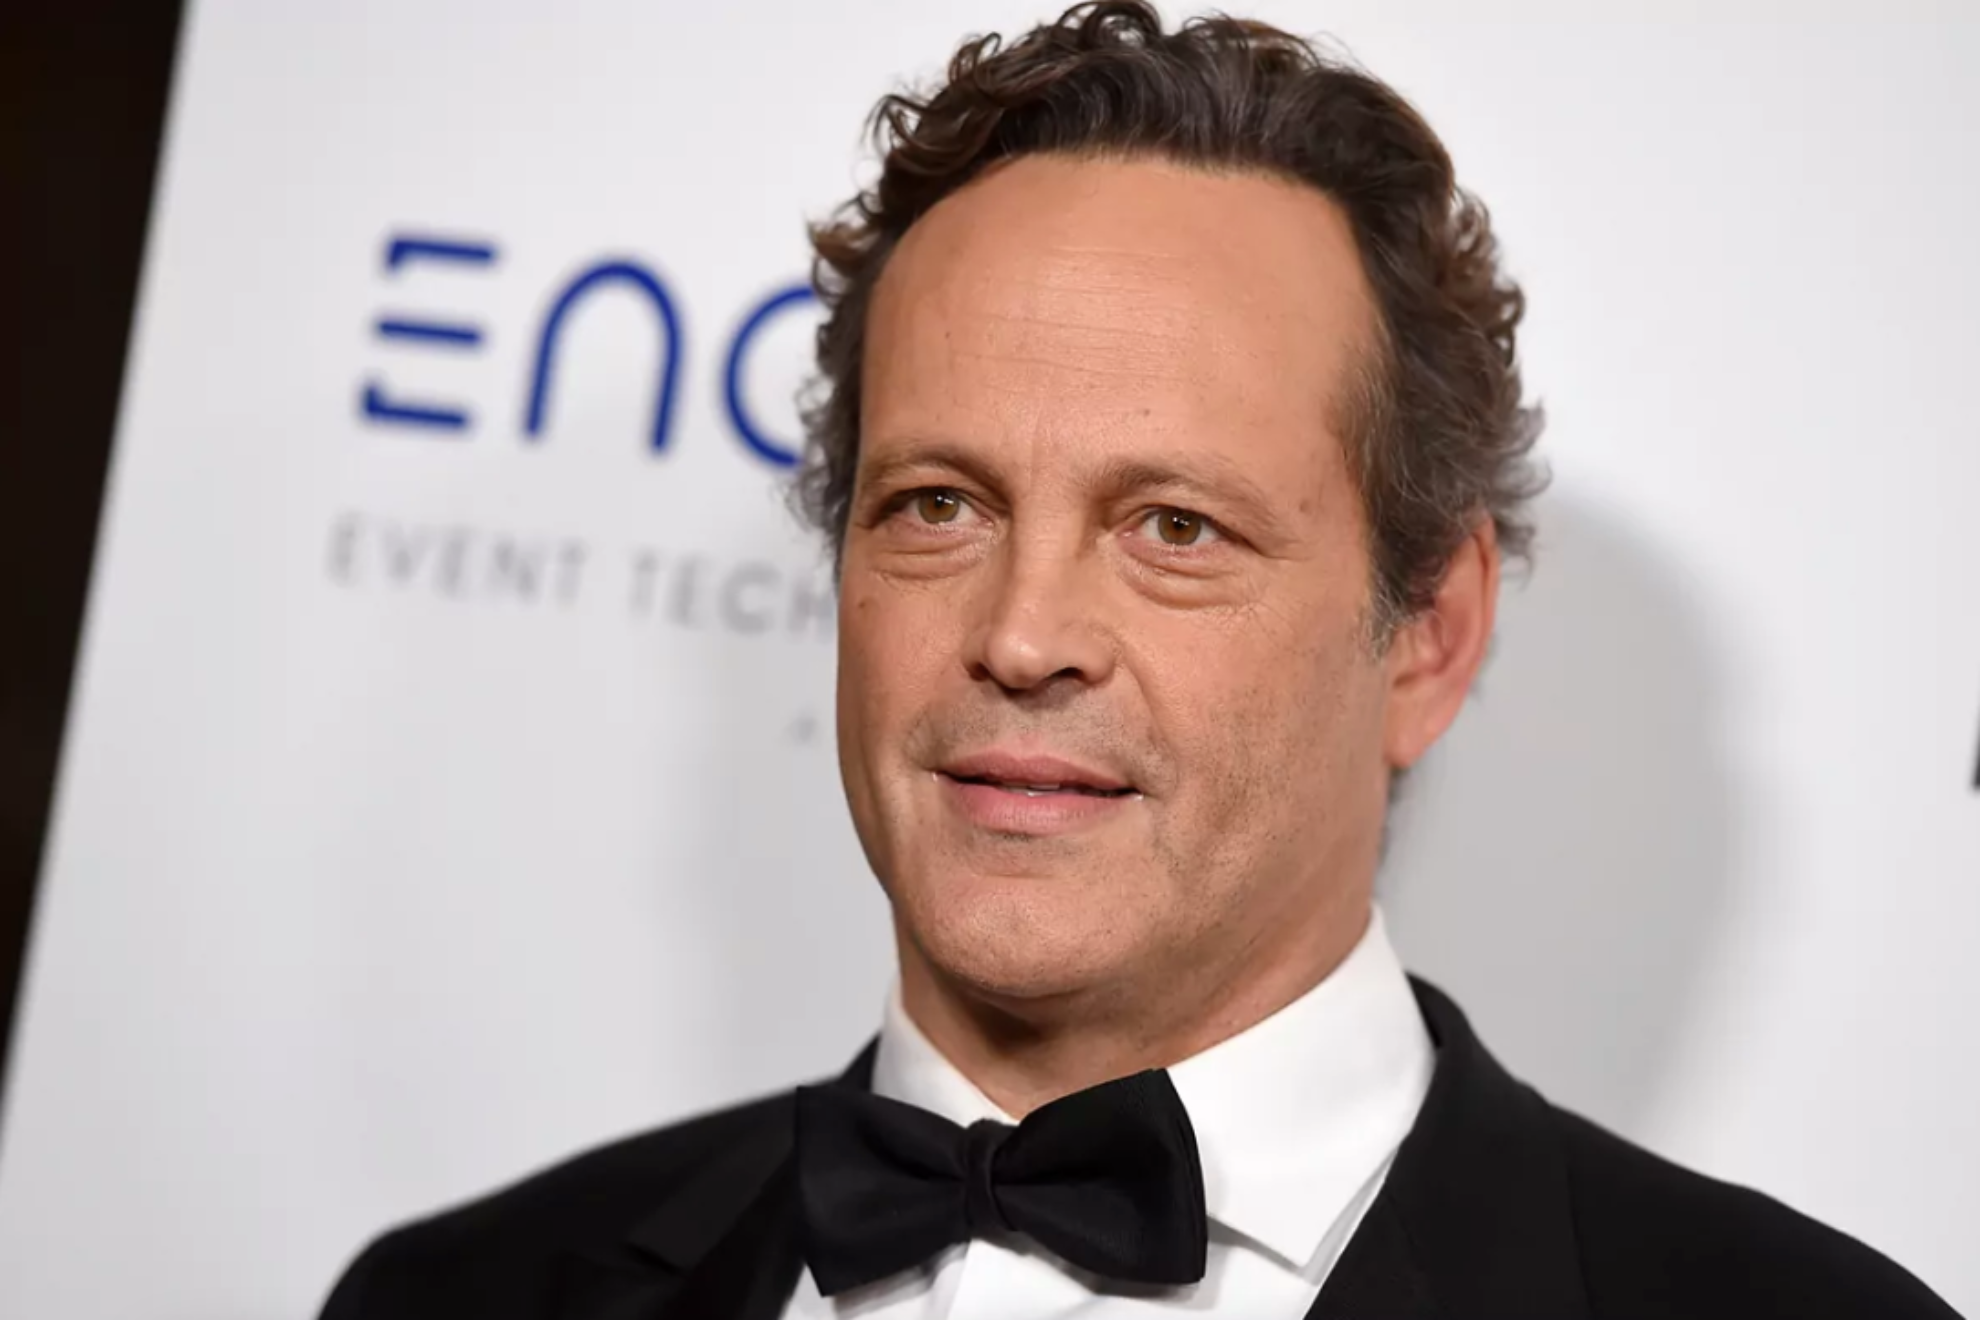 Hollywood star Vince Vaughn selected to be guest picker on Notre Dame vs Ohio State GameDay